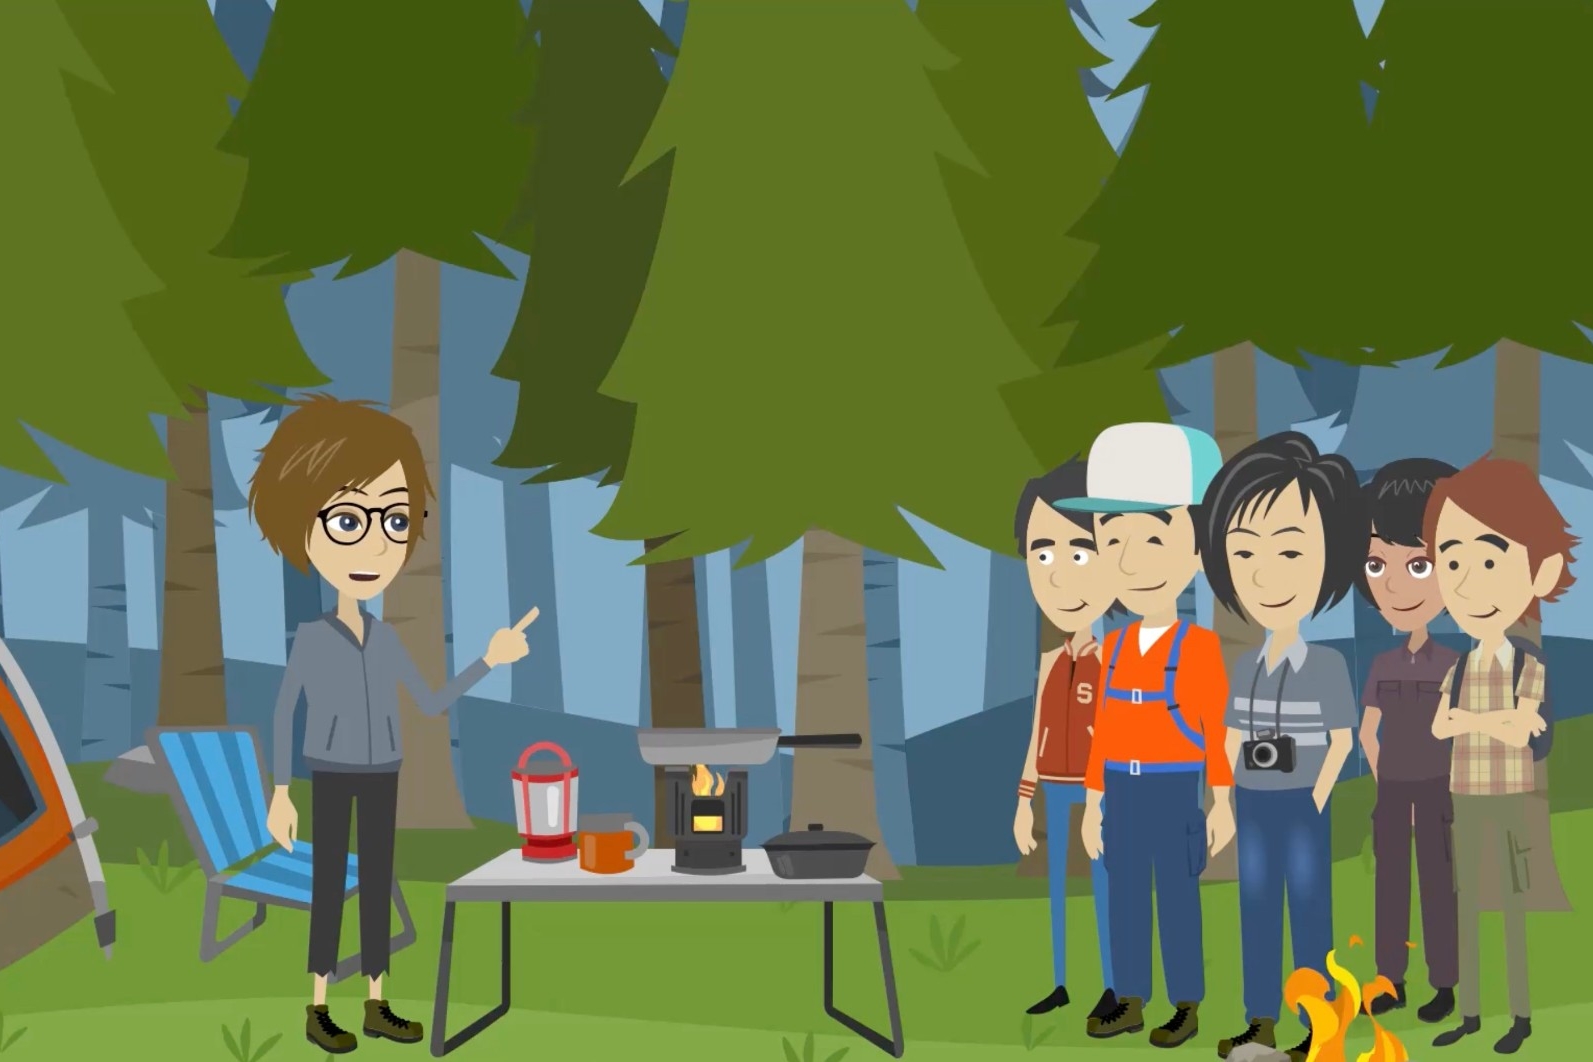 animated image of people at campsite